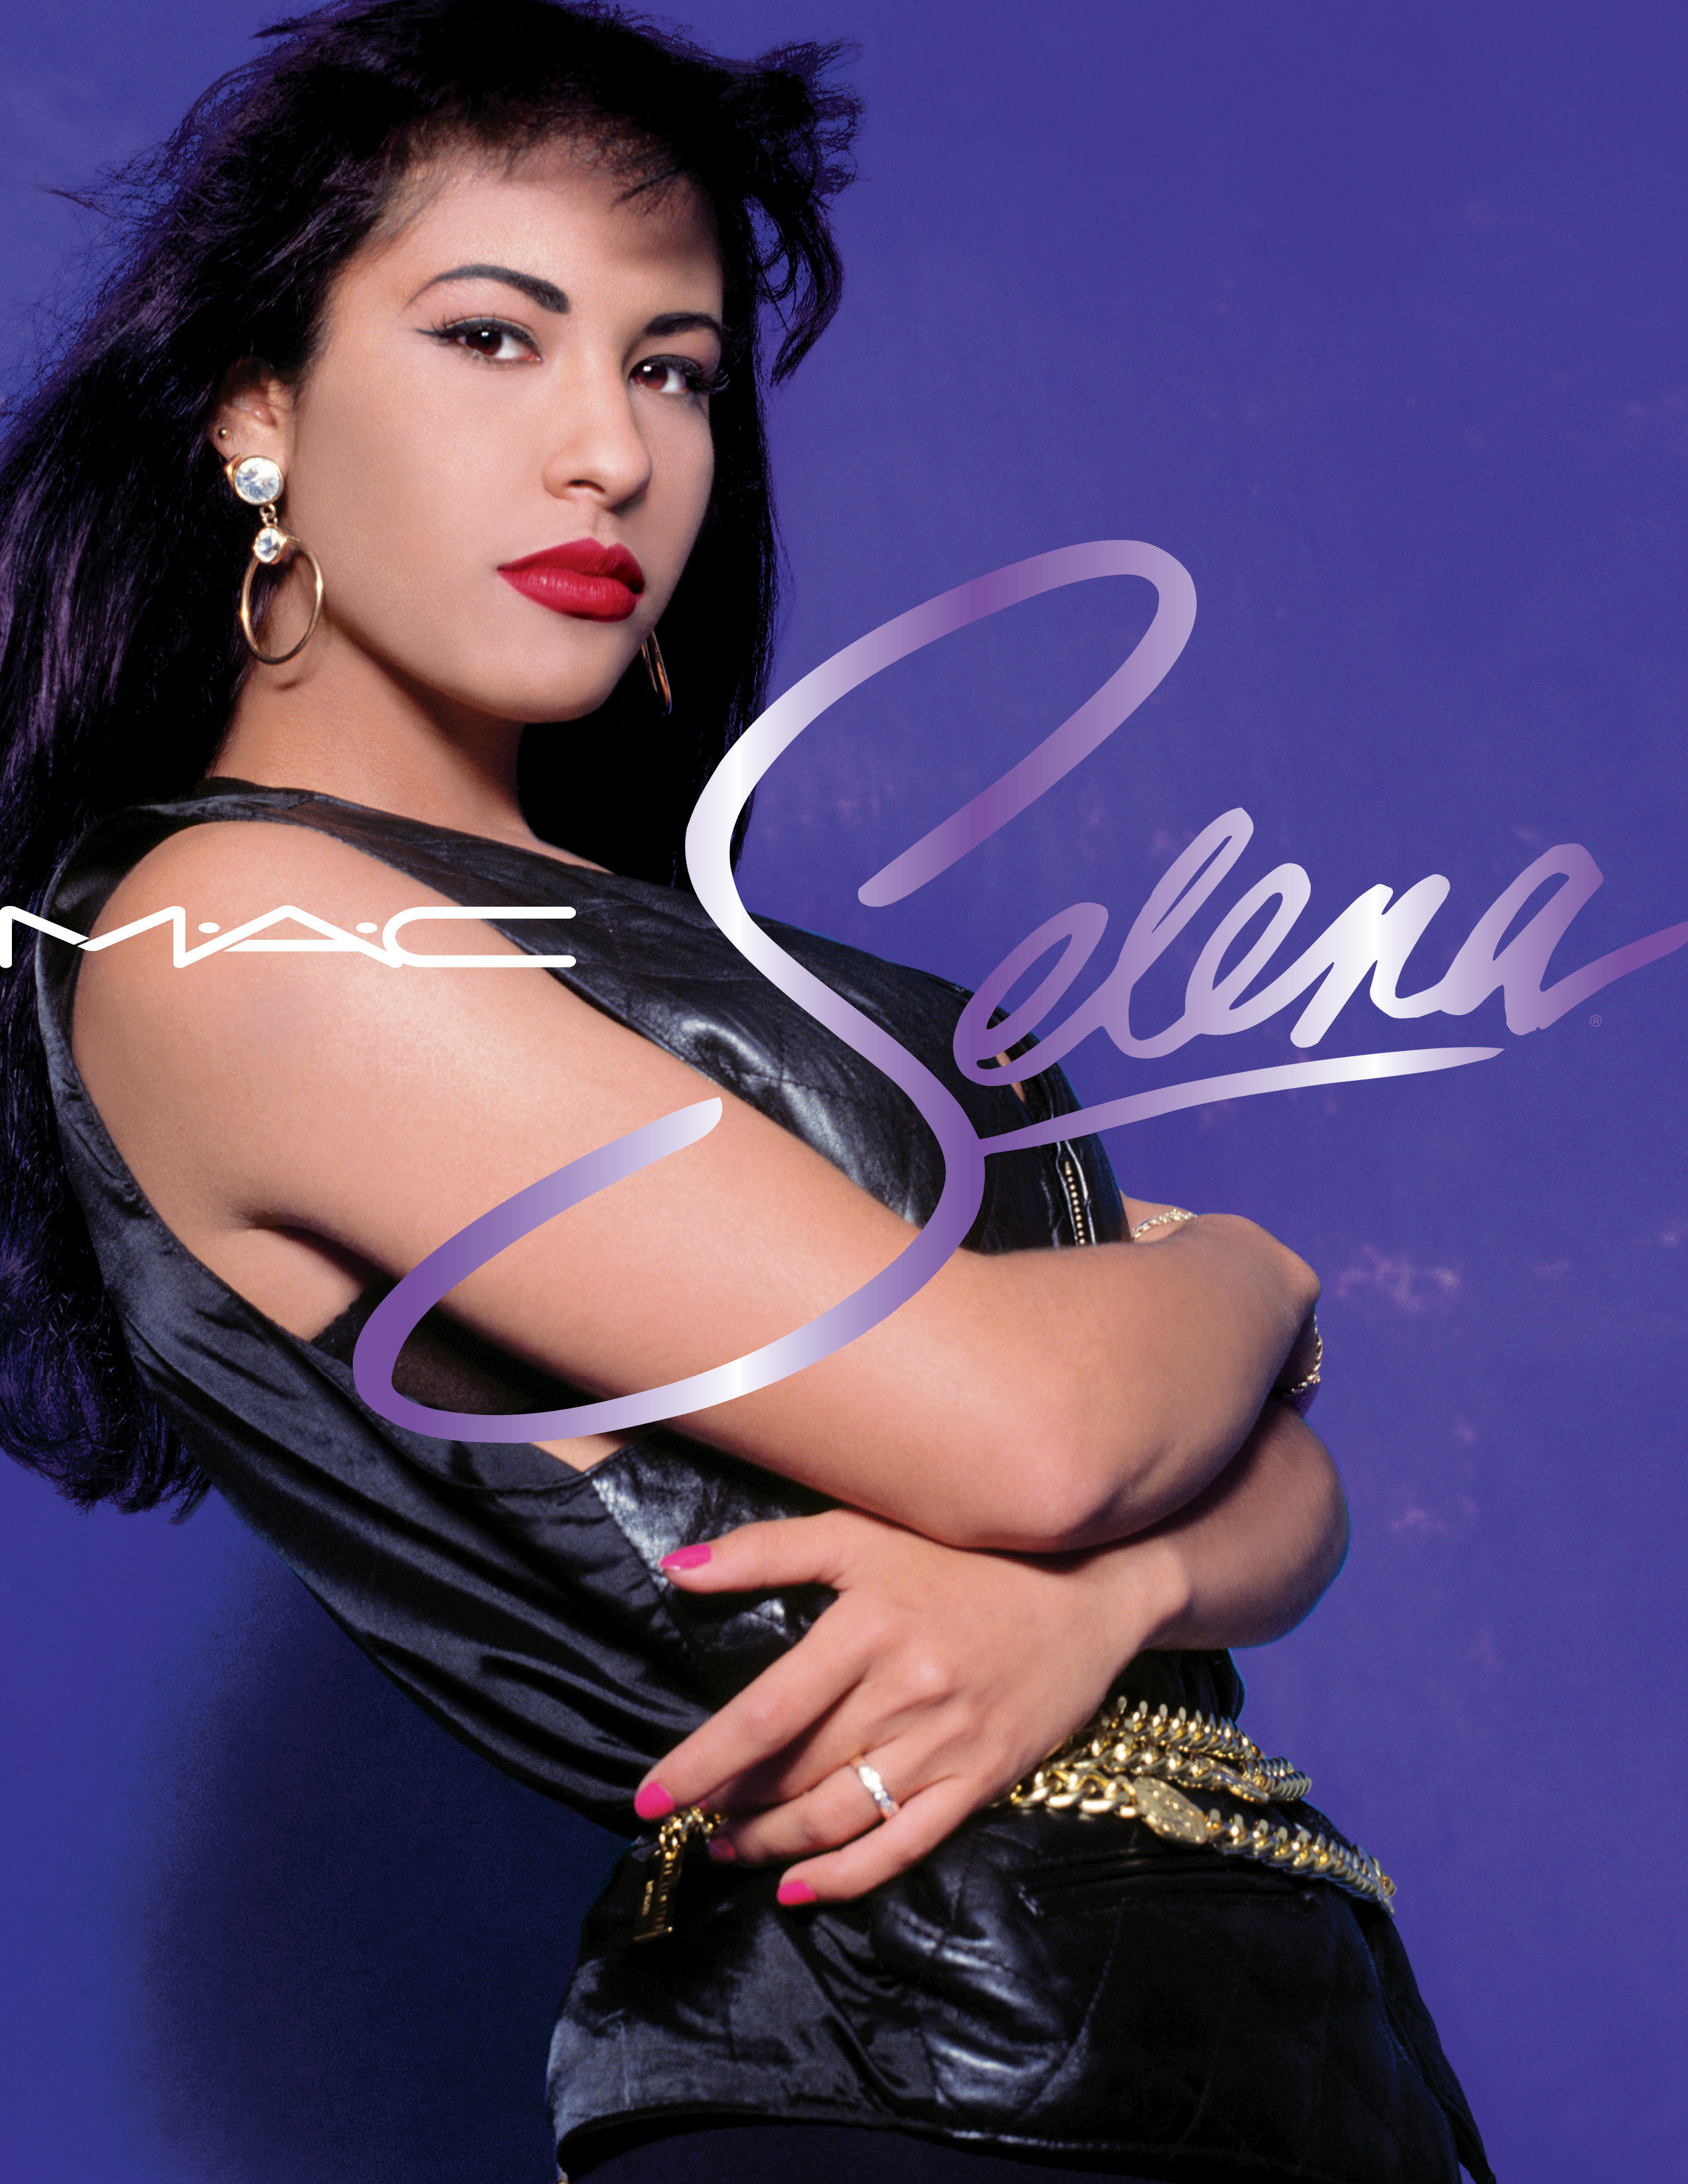 when is selena quintanilla lipstick mac being released